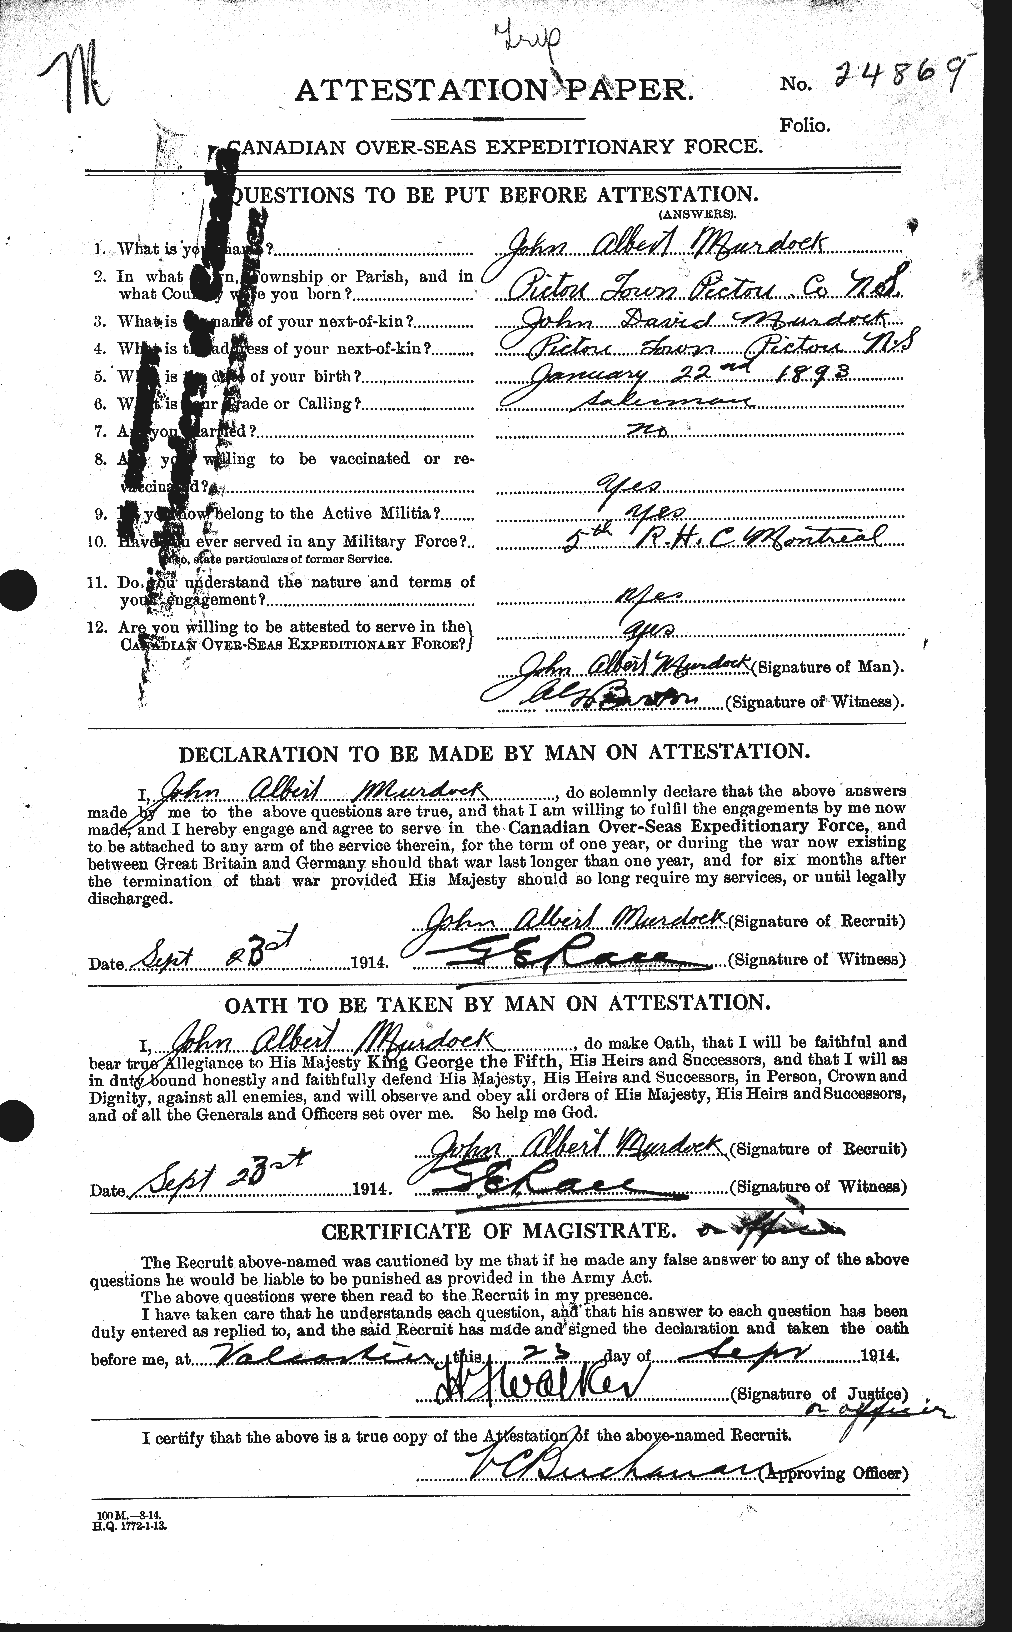 Personnel Records of the First World War - CEF 510939a